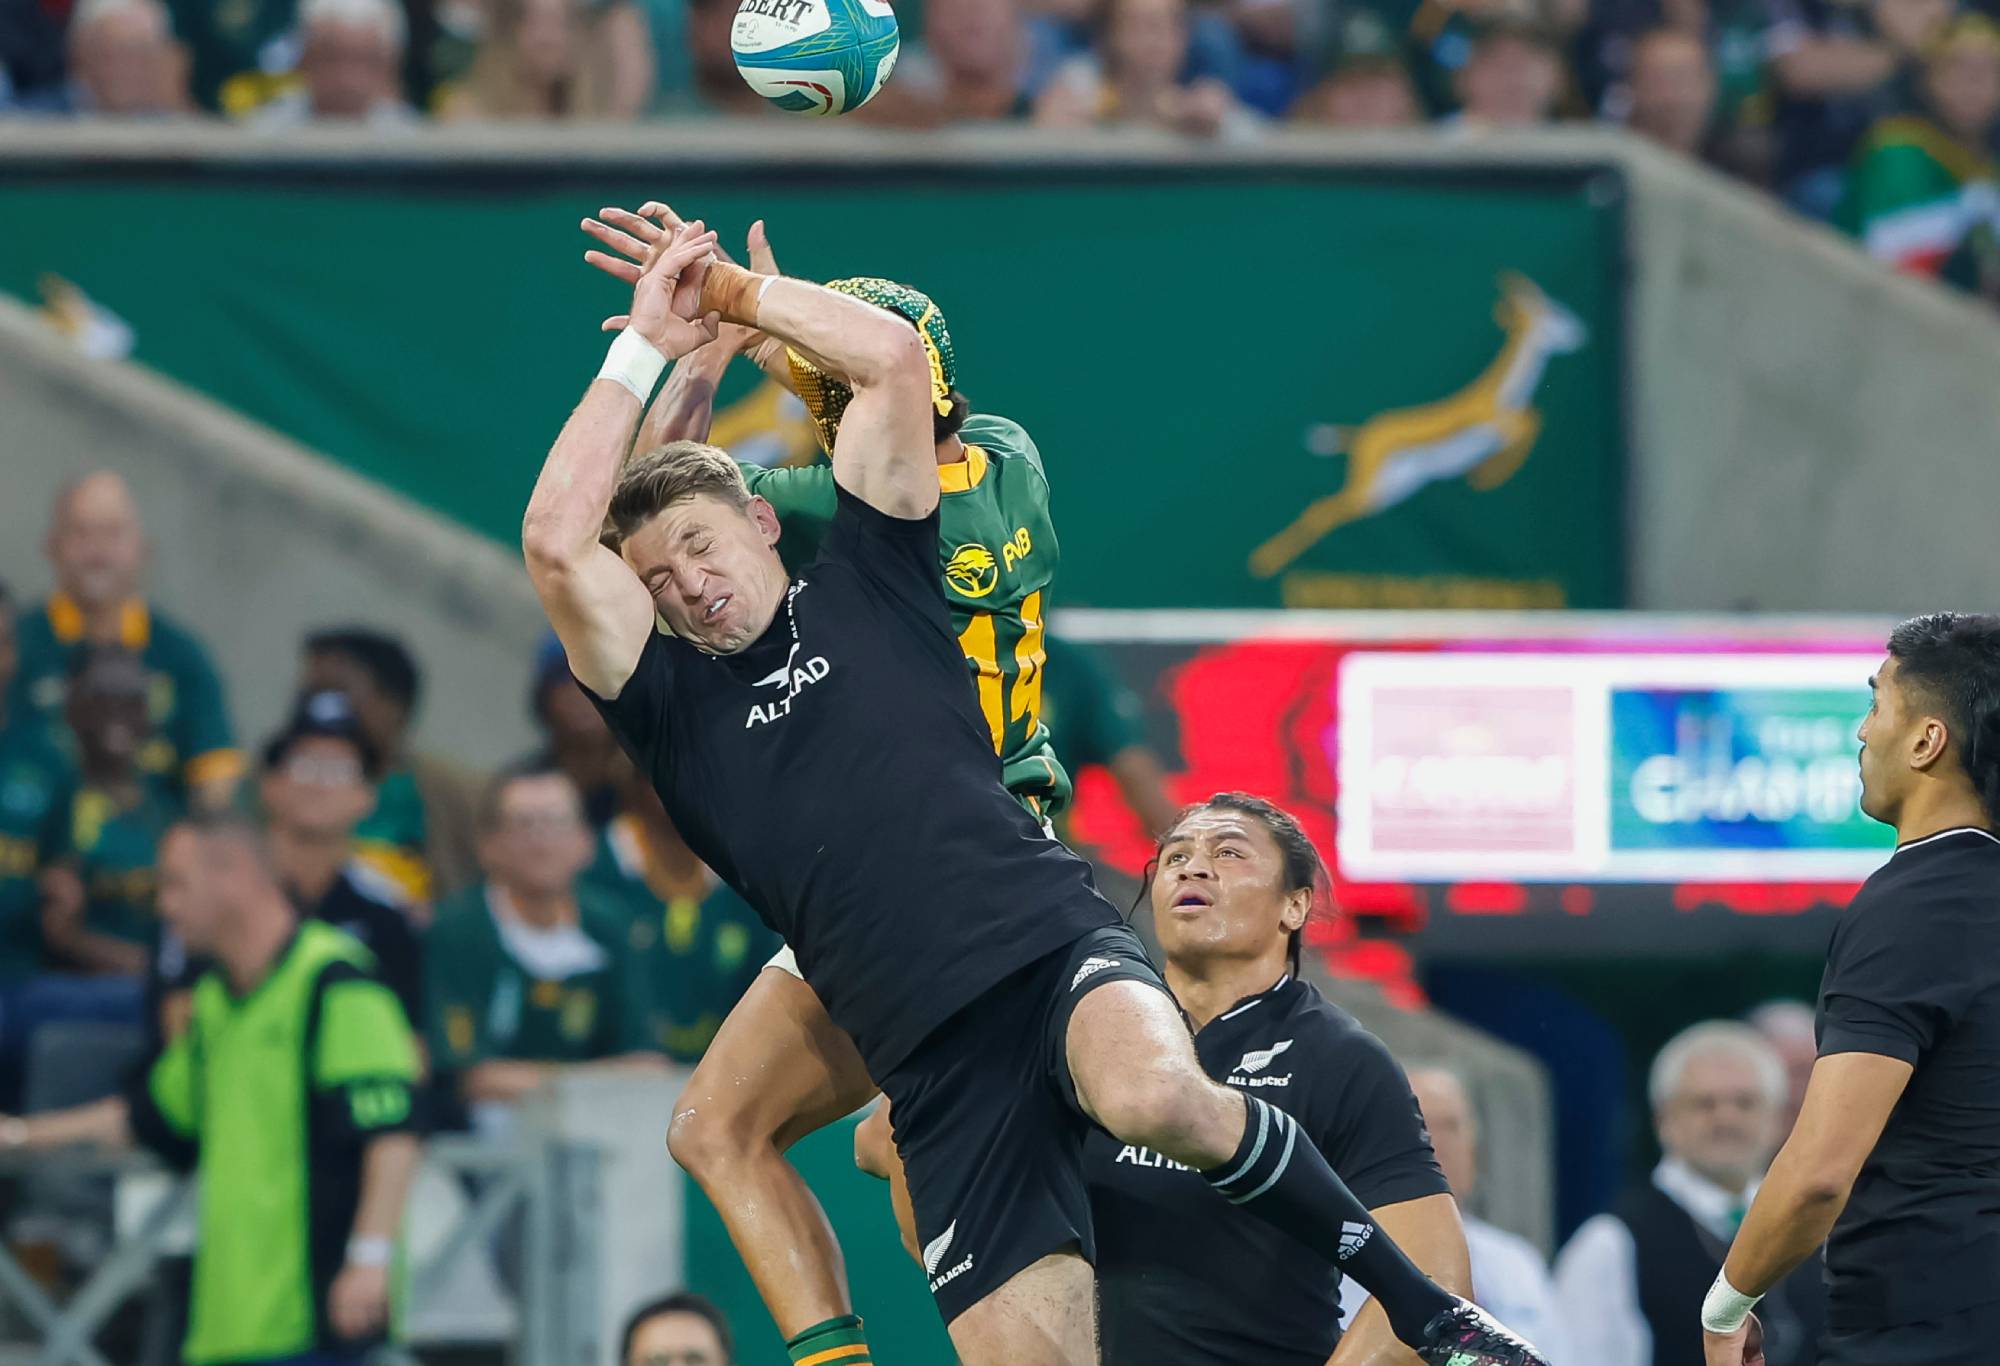 Beauden Barrett of New Zealand and Kurt-Lee Arendse of South Africa during The Rugby Championship match between South Africa and New Zealand at Mbombela Stadium on August 06, 2022 in Nelspruit, South Africa. (Photo by Dirk Kotze/Gallo Images/Getty Images)